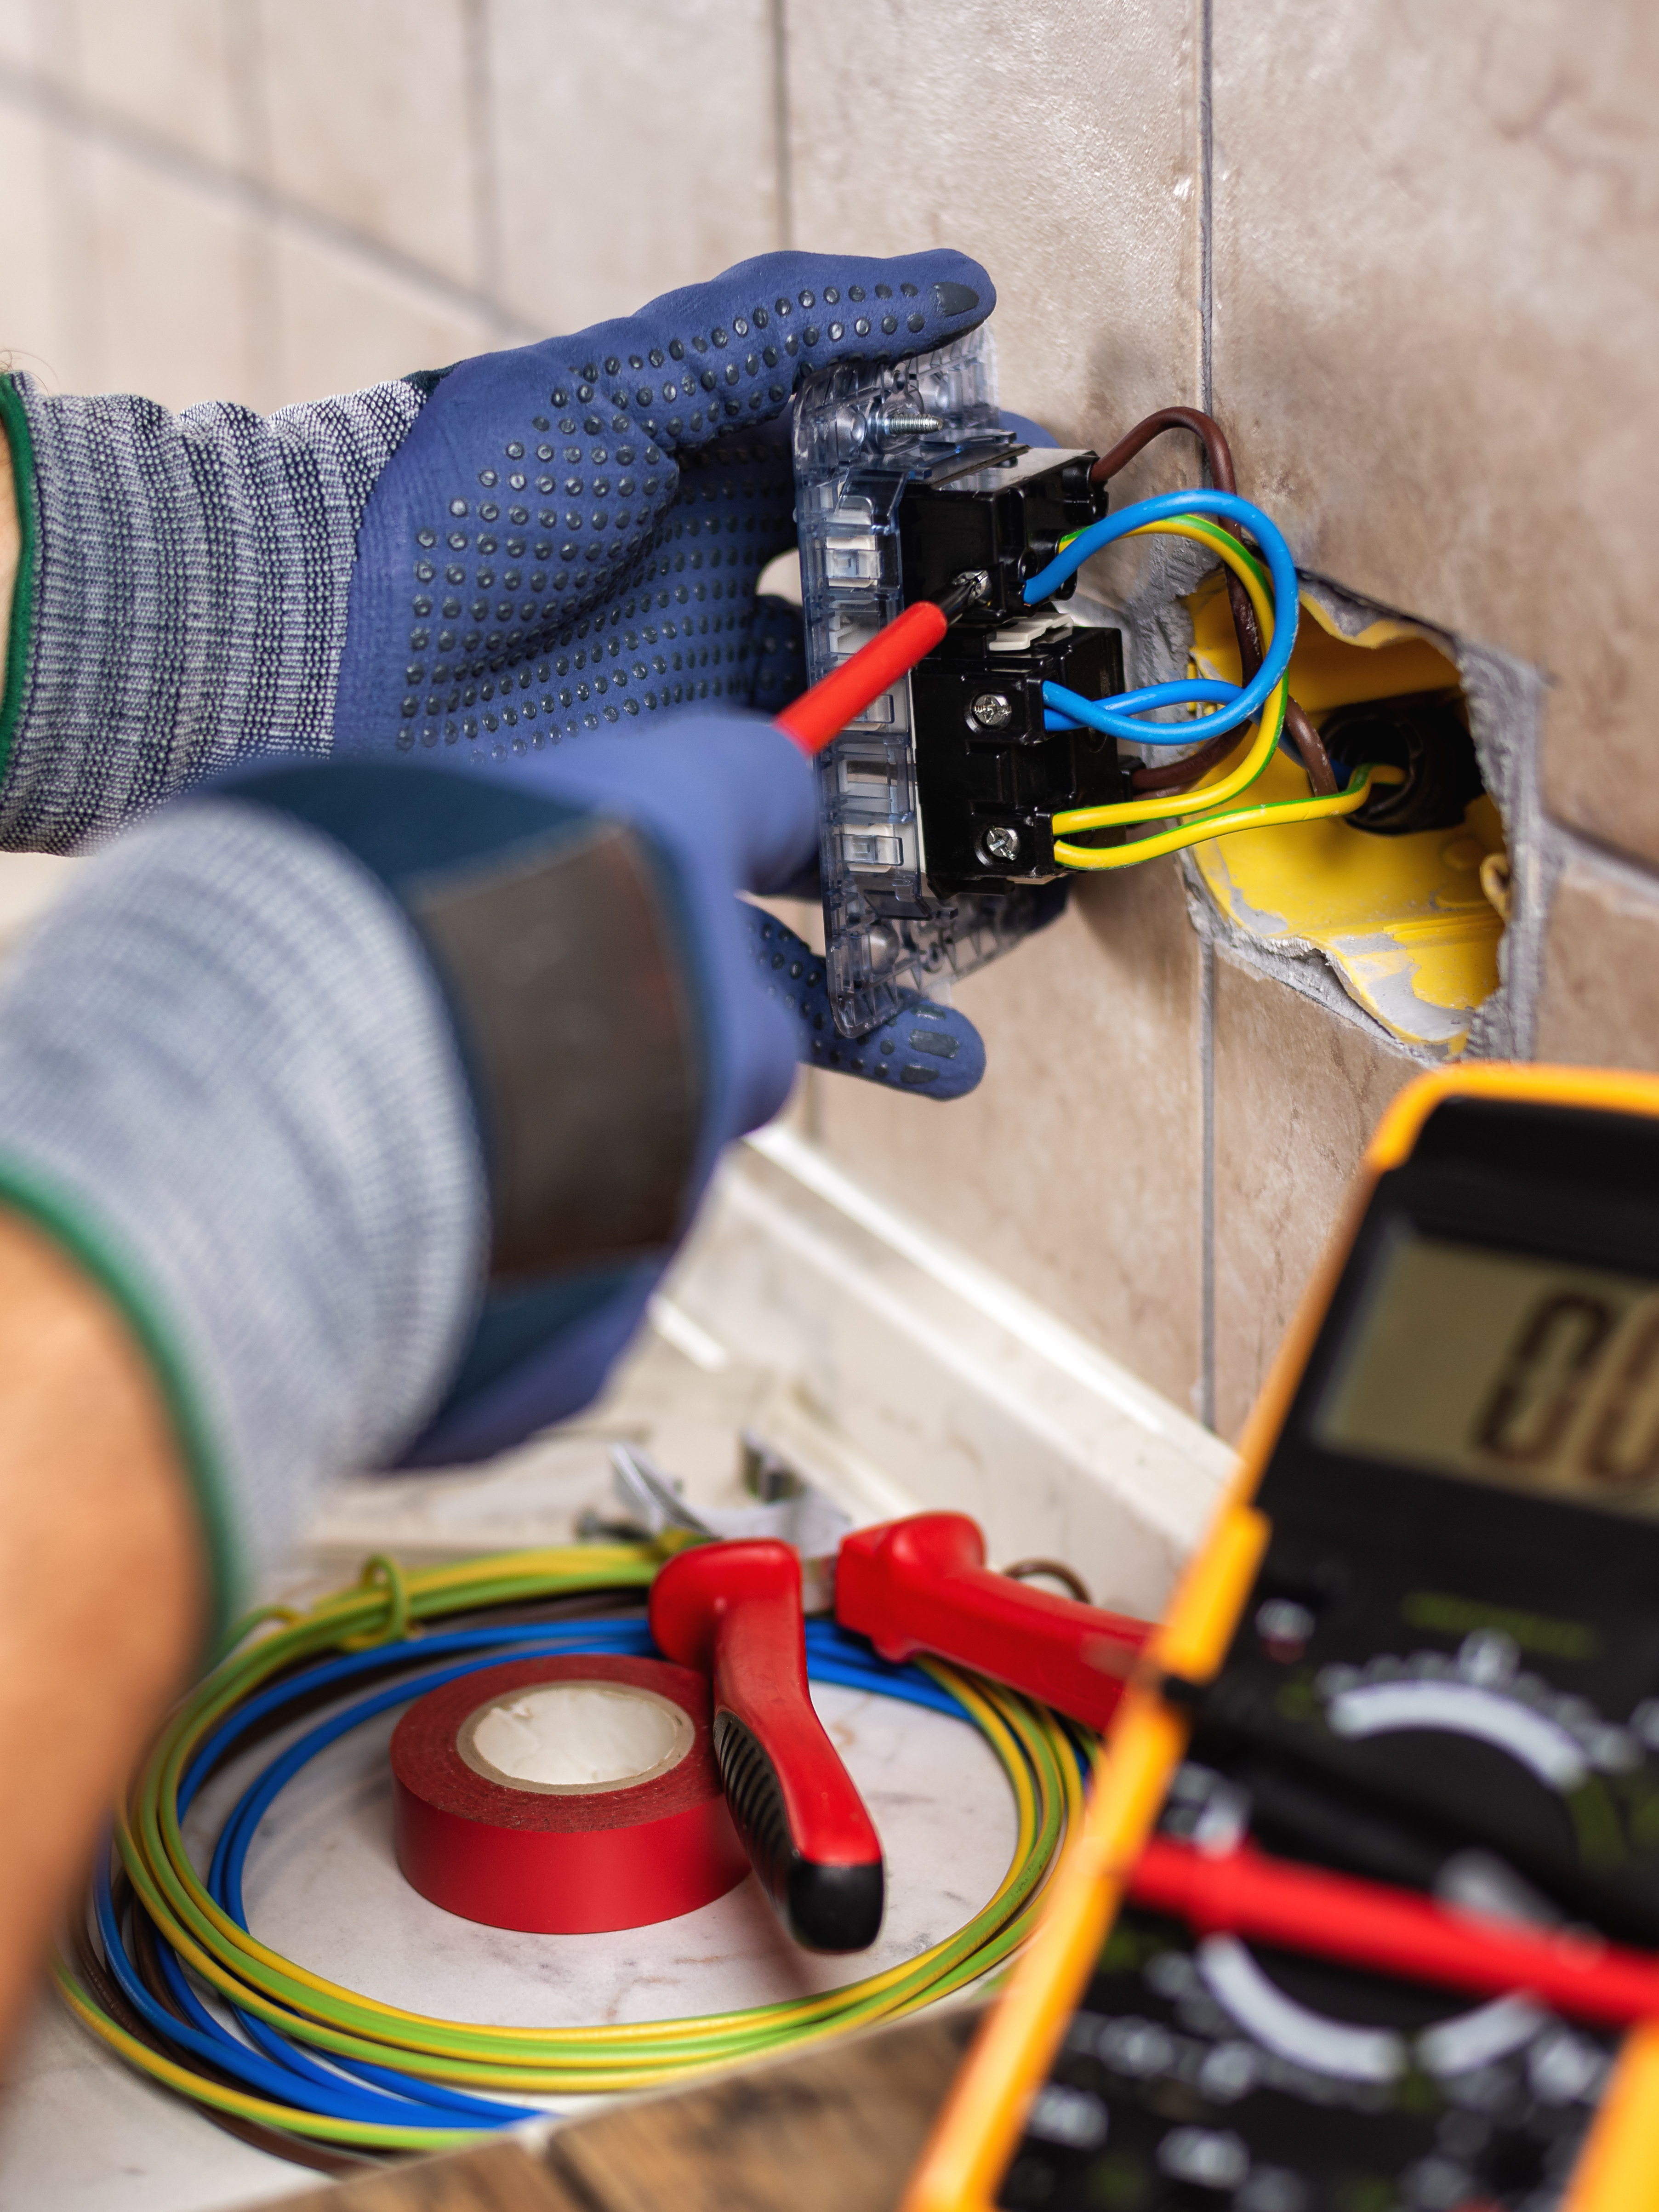 Custom Electrical working on electrical wiring in a kitchen, making sure you stay safe.